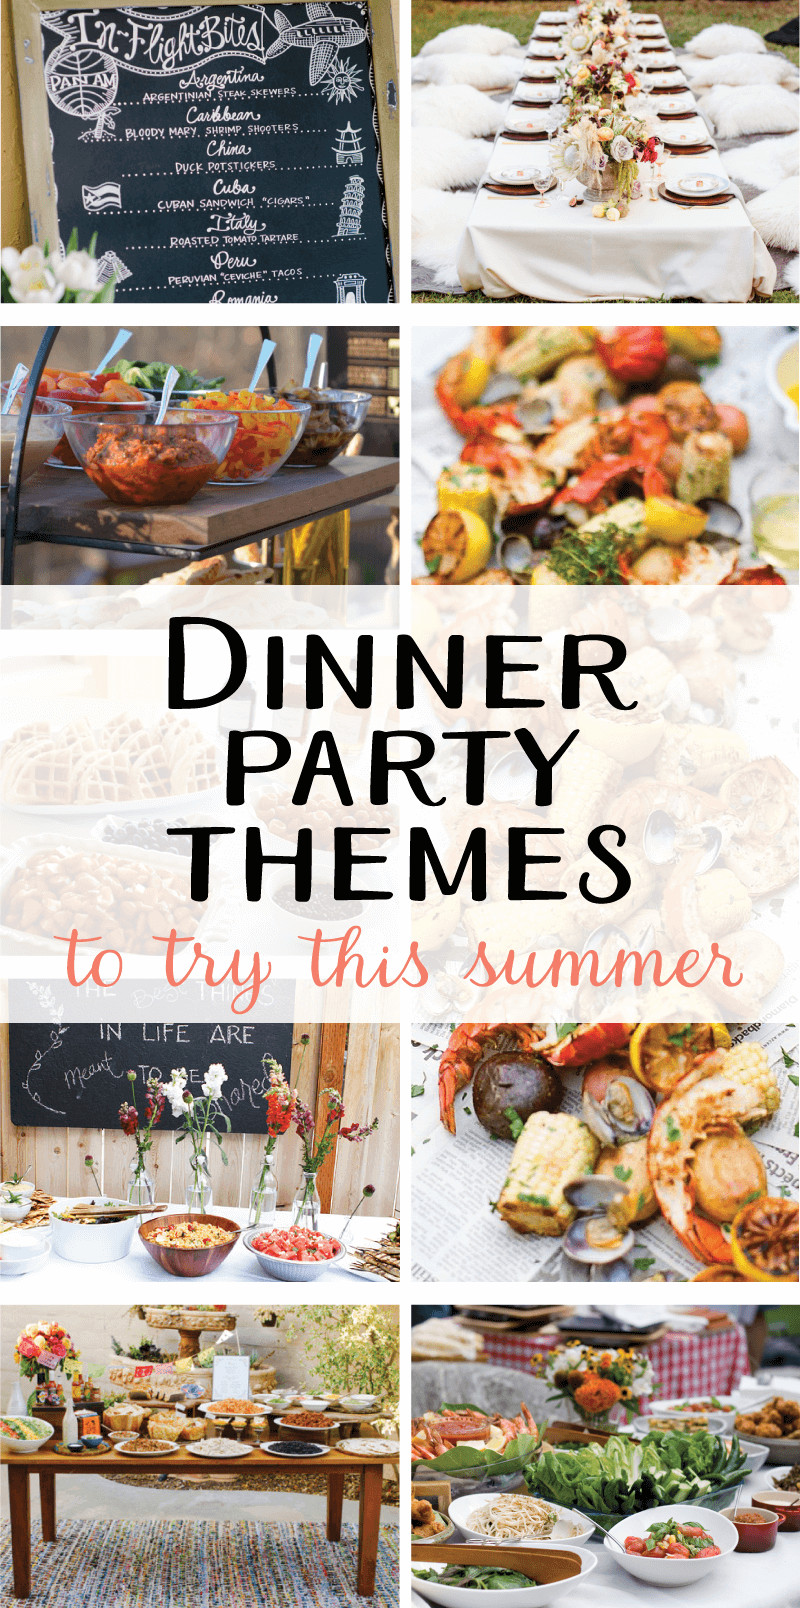 Summer Dinner Menus
 9 Creative Dinner Party Themes to Try this Summer on Love